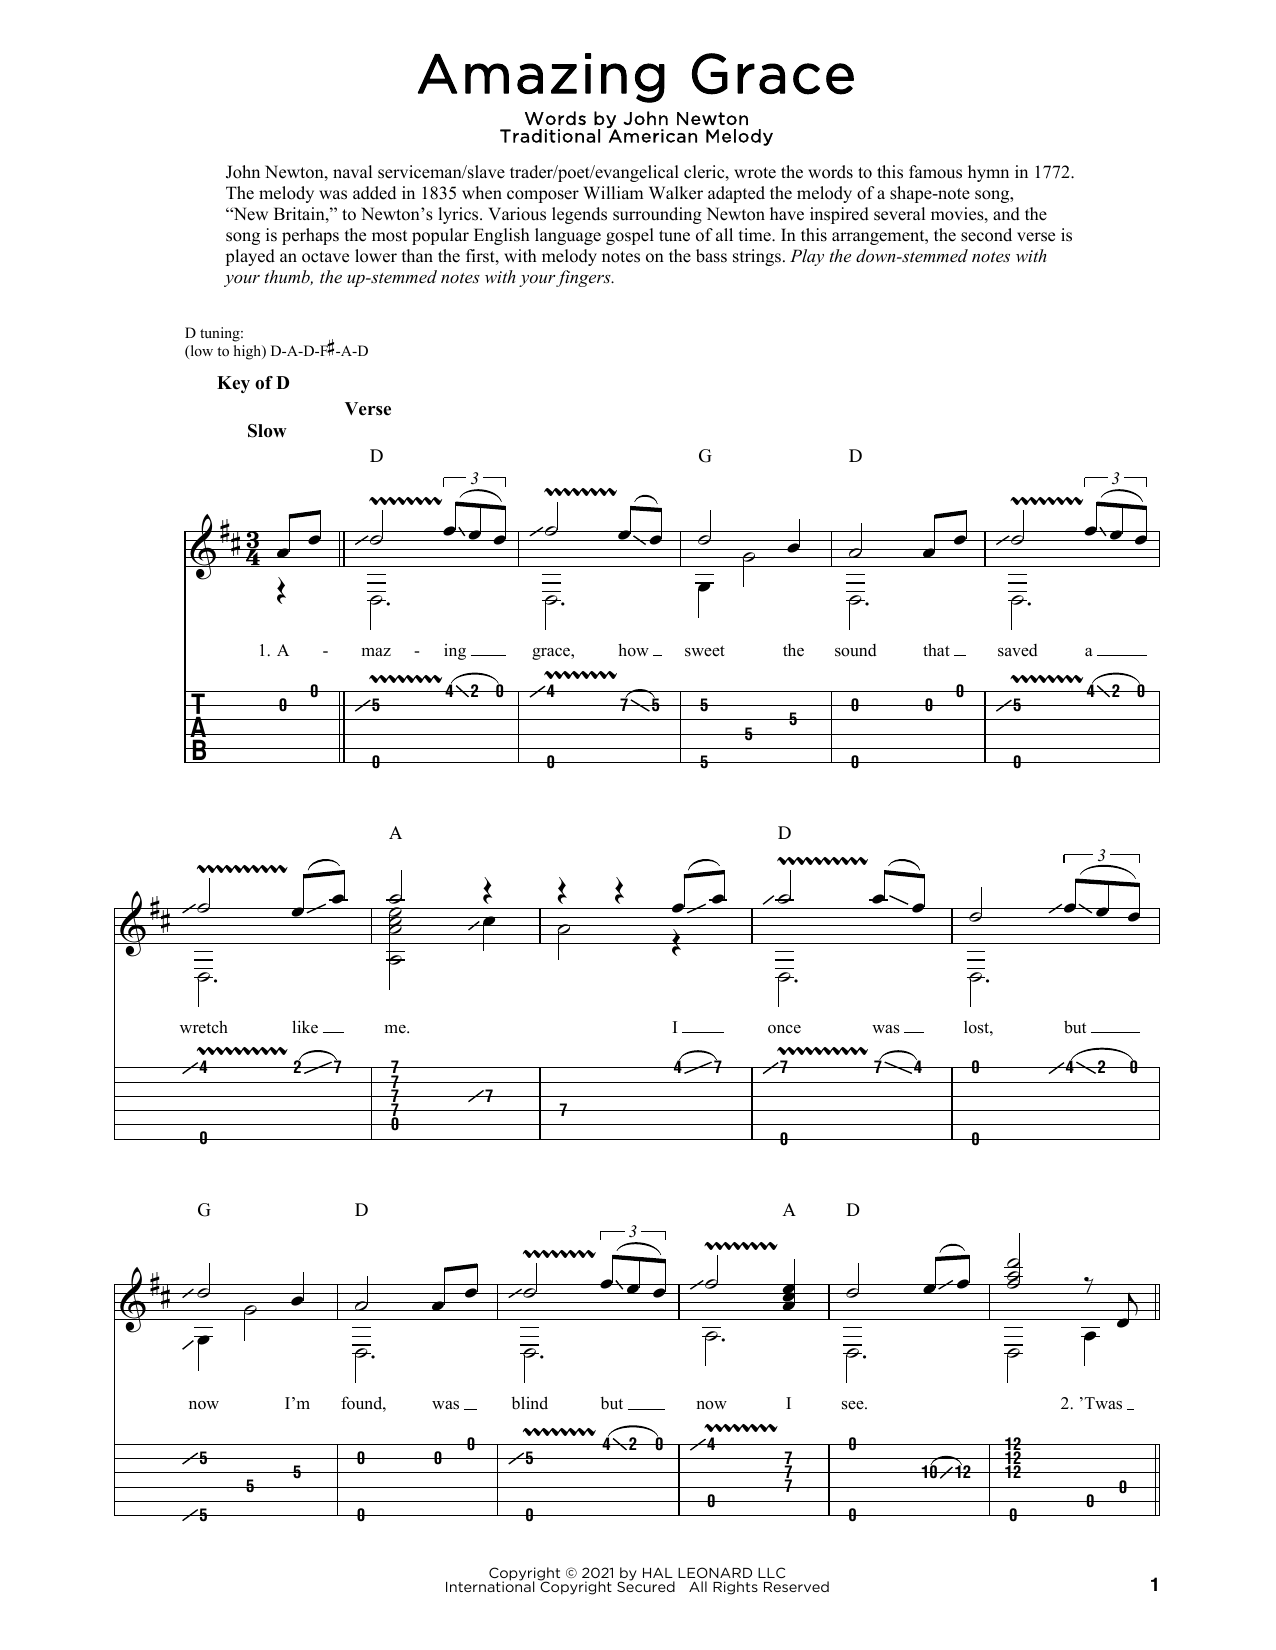 Download Traditional American Melody Amazing Grace Sheet Music